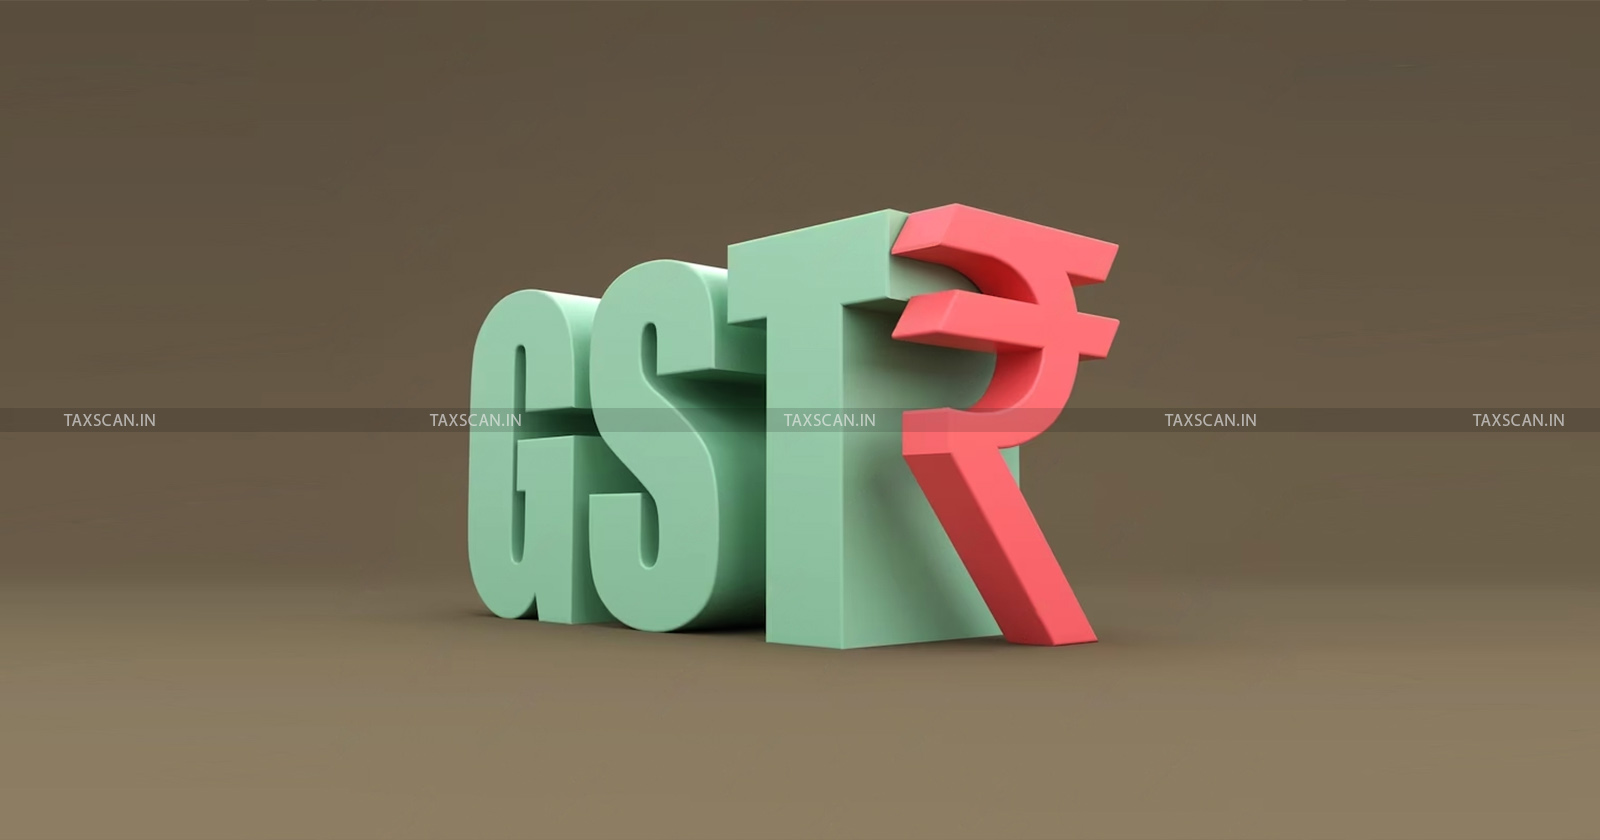 Kerala GST Department issues Instructions - Kerala GST Department - GST Department - Separate Notices to Taxpayers - KGST Act - taxscan